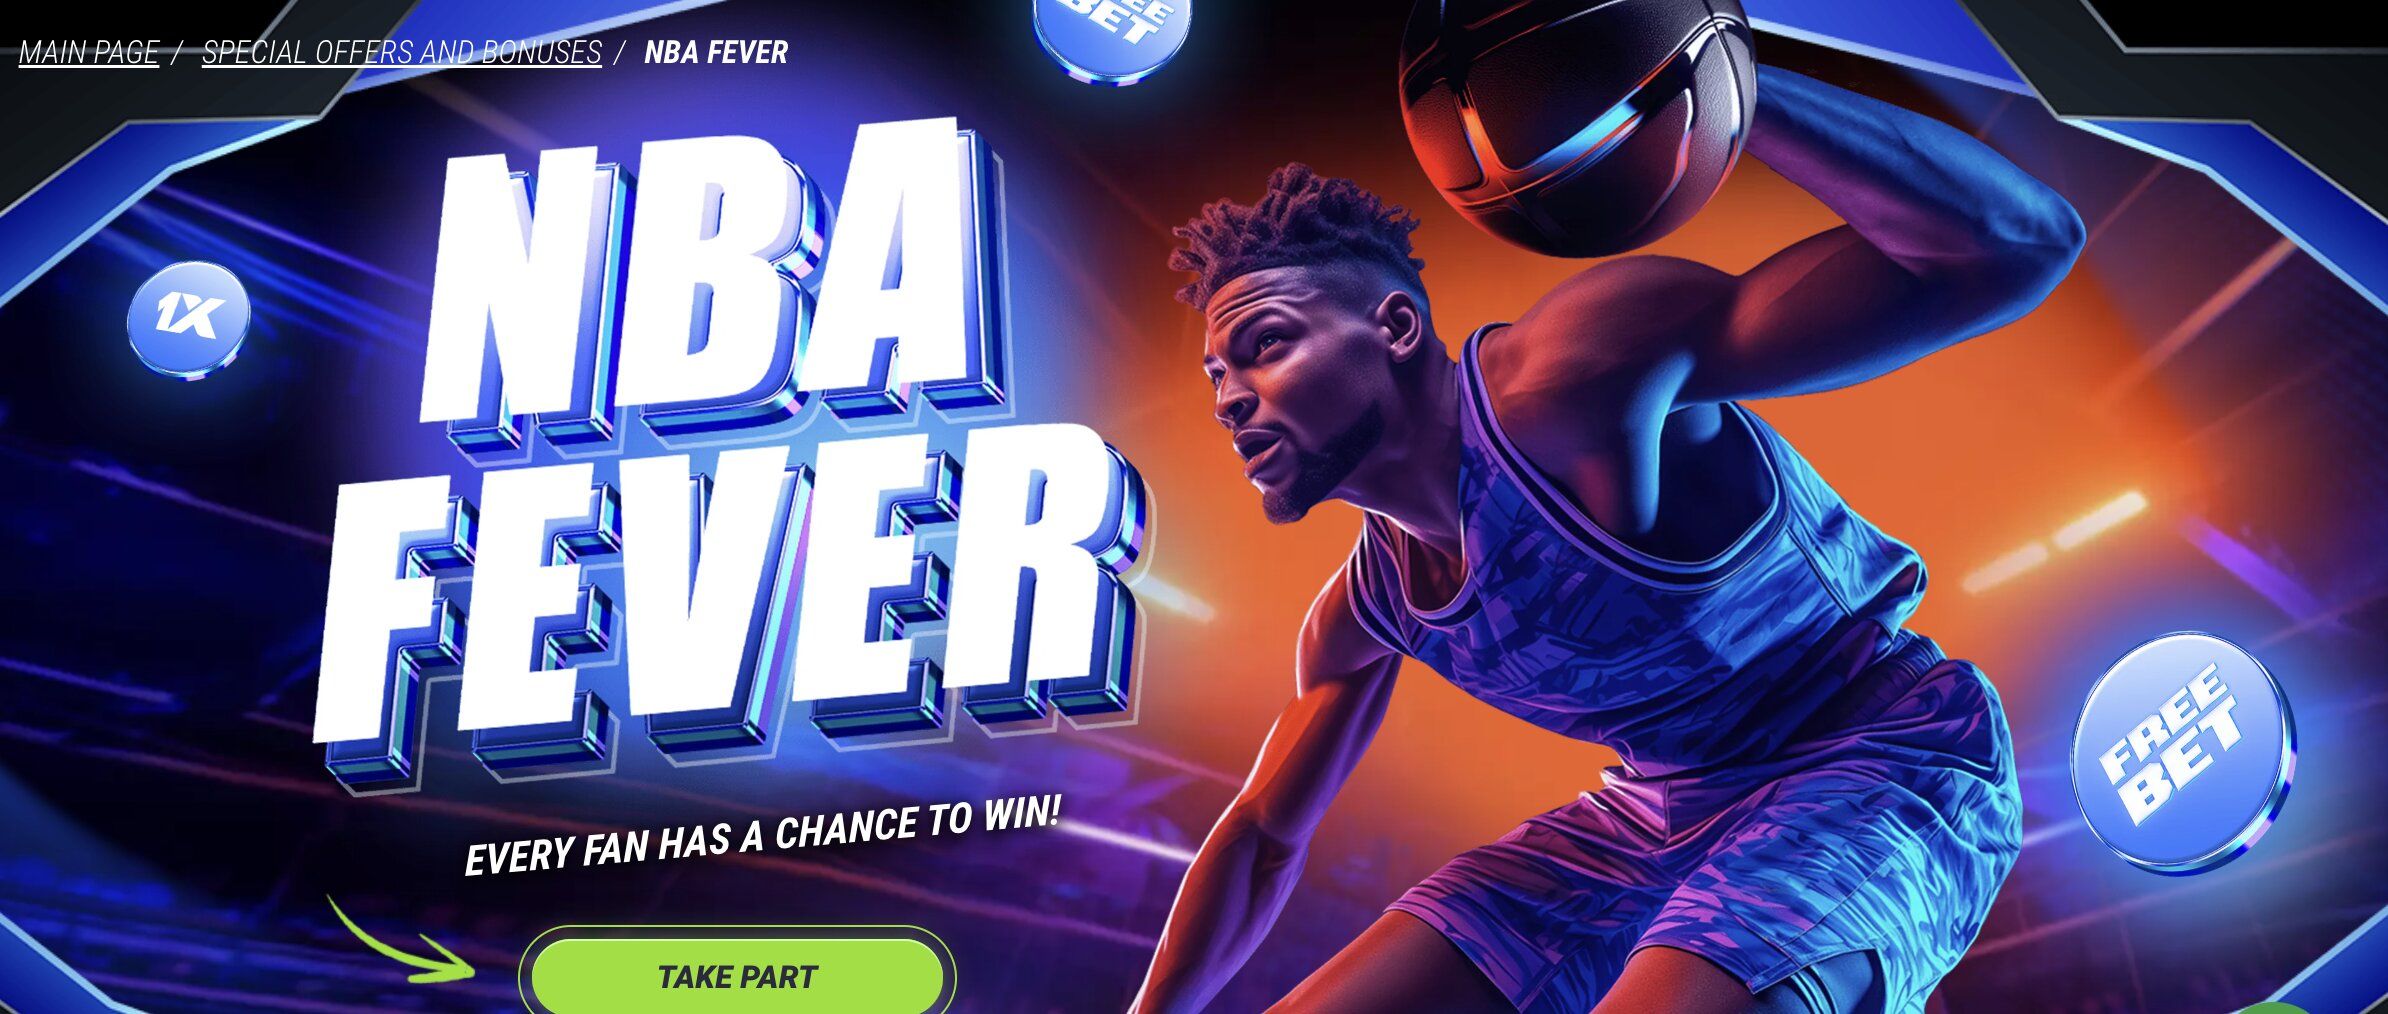 1xBet NBA Fever Promotion